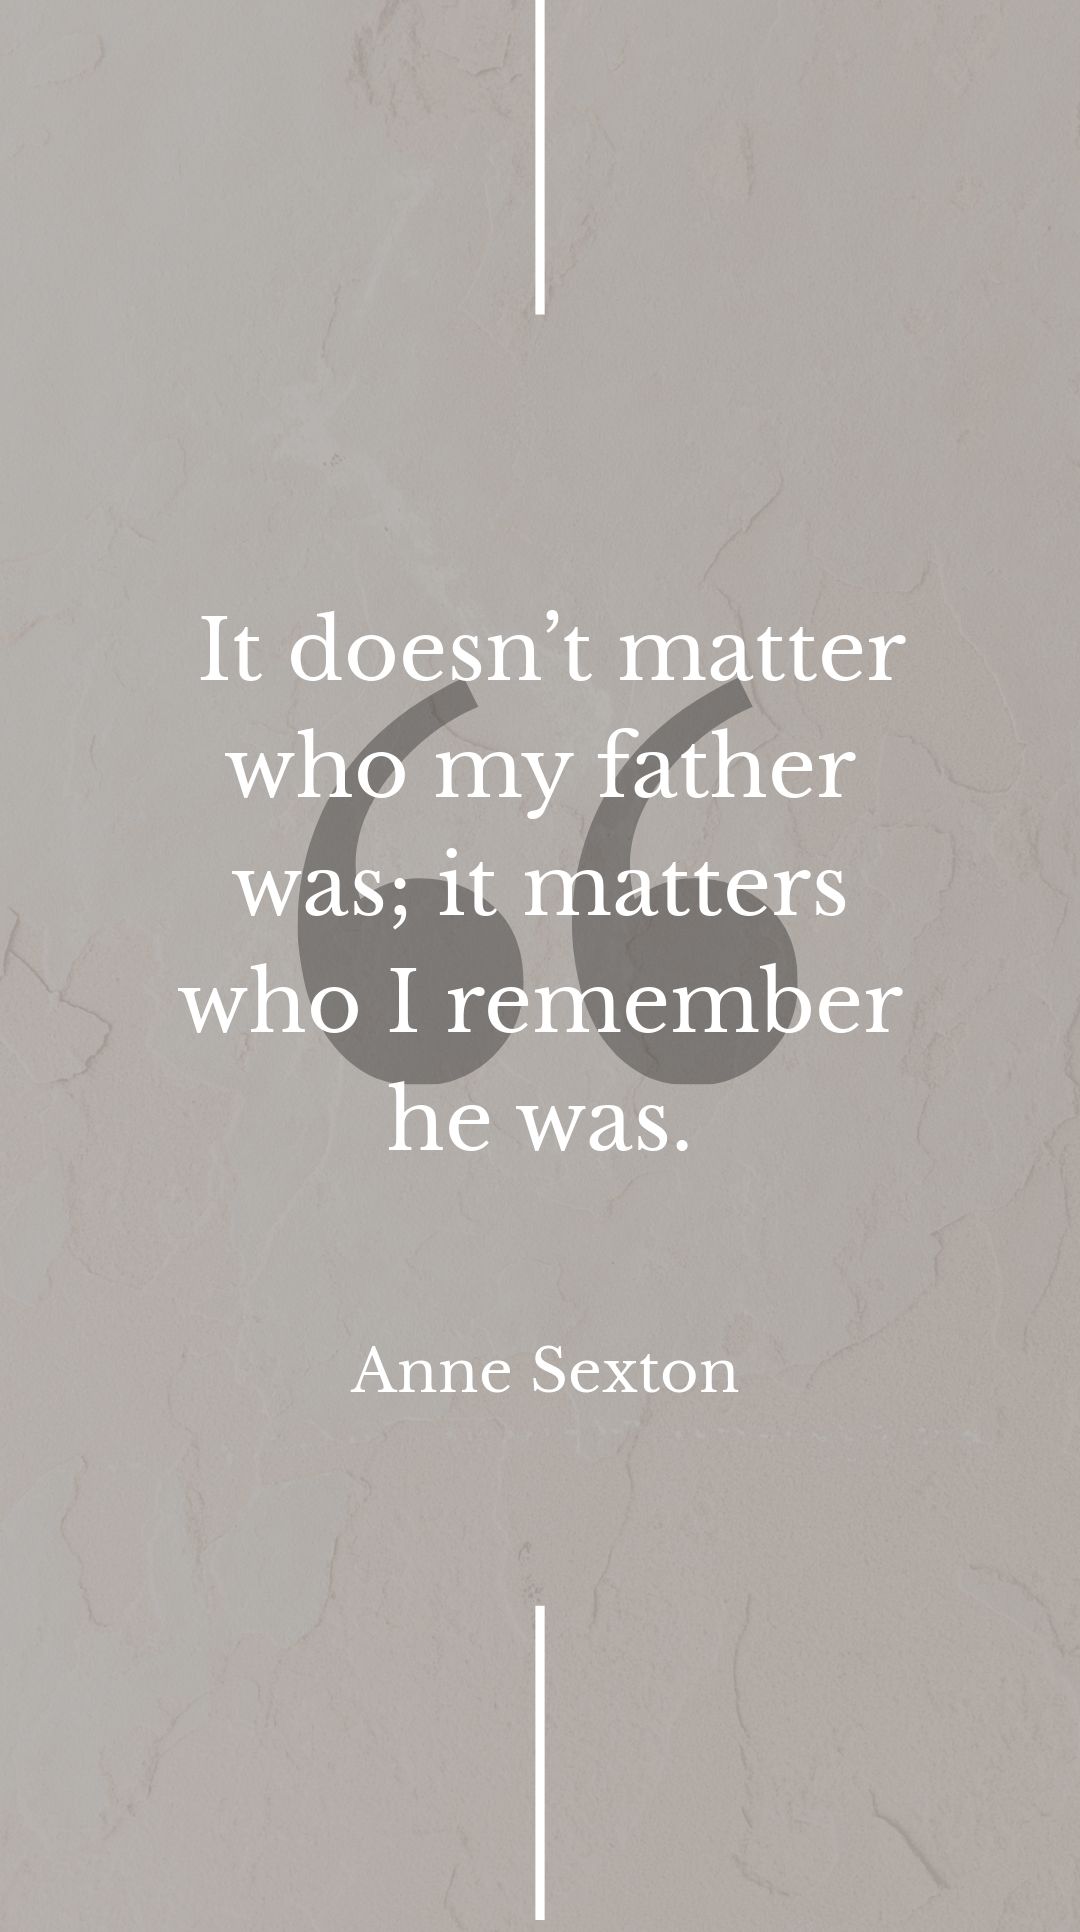 Free Anne Sexton - It doesn’t matter who my father was; it matters who I remember he was.